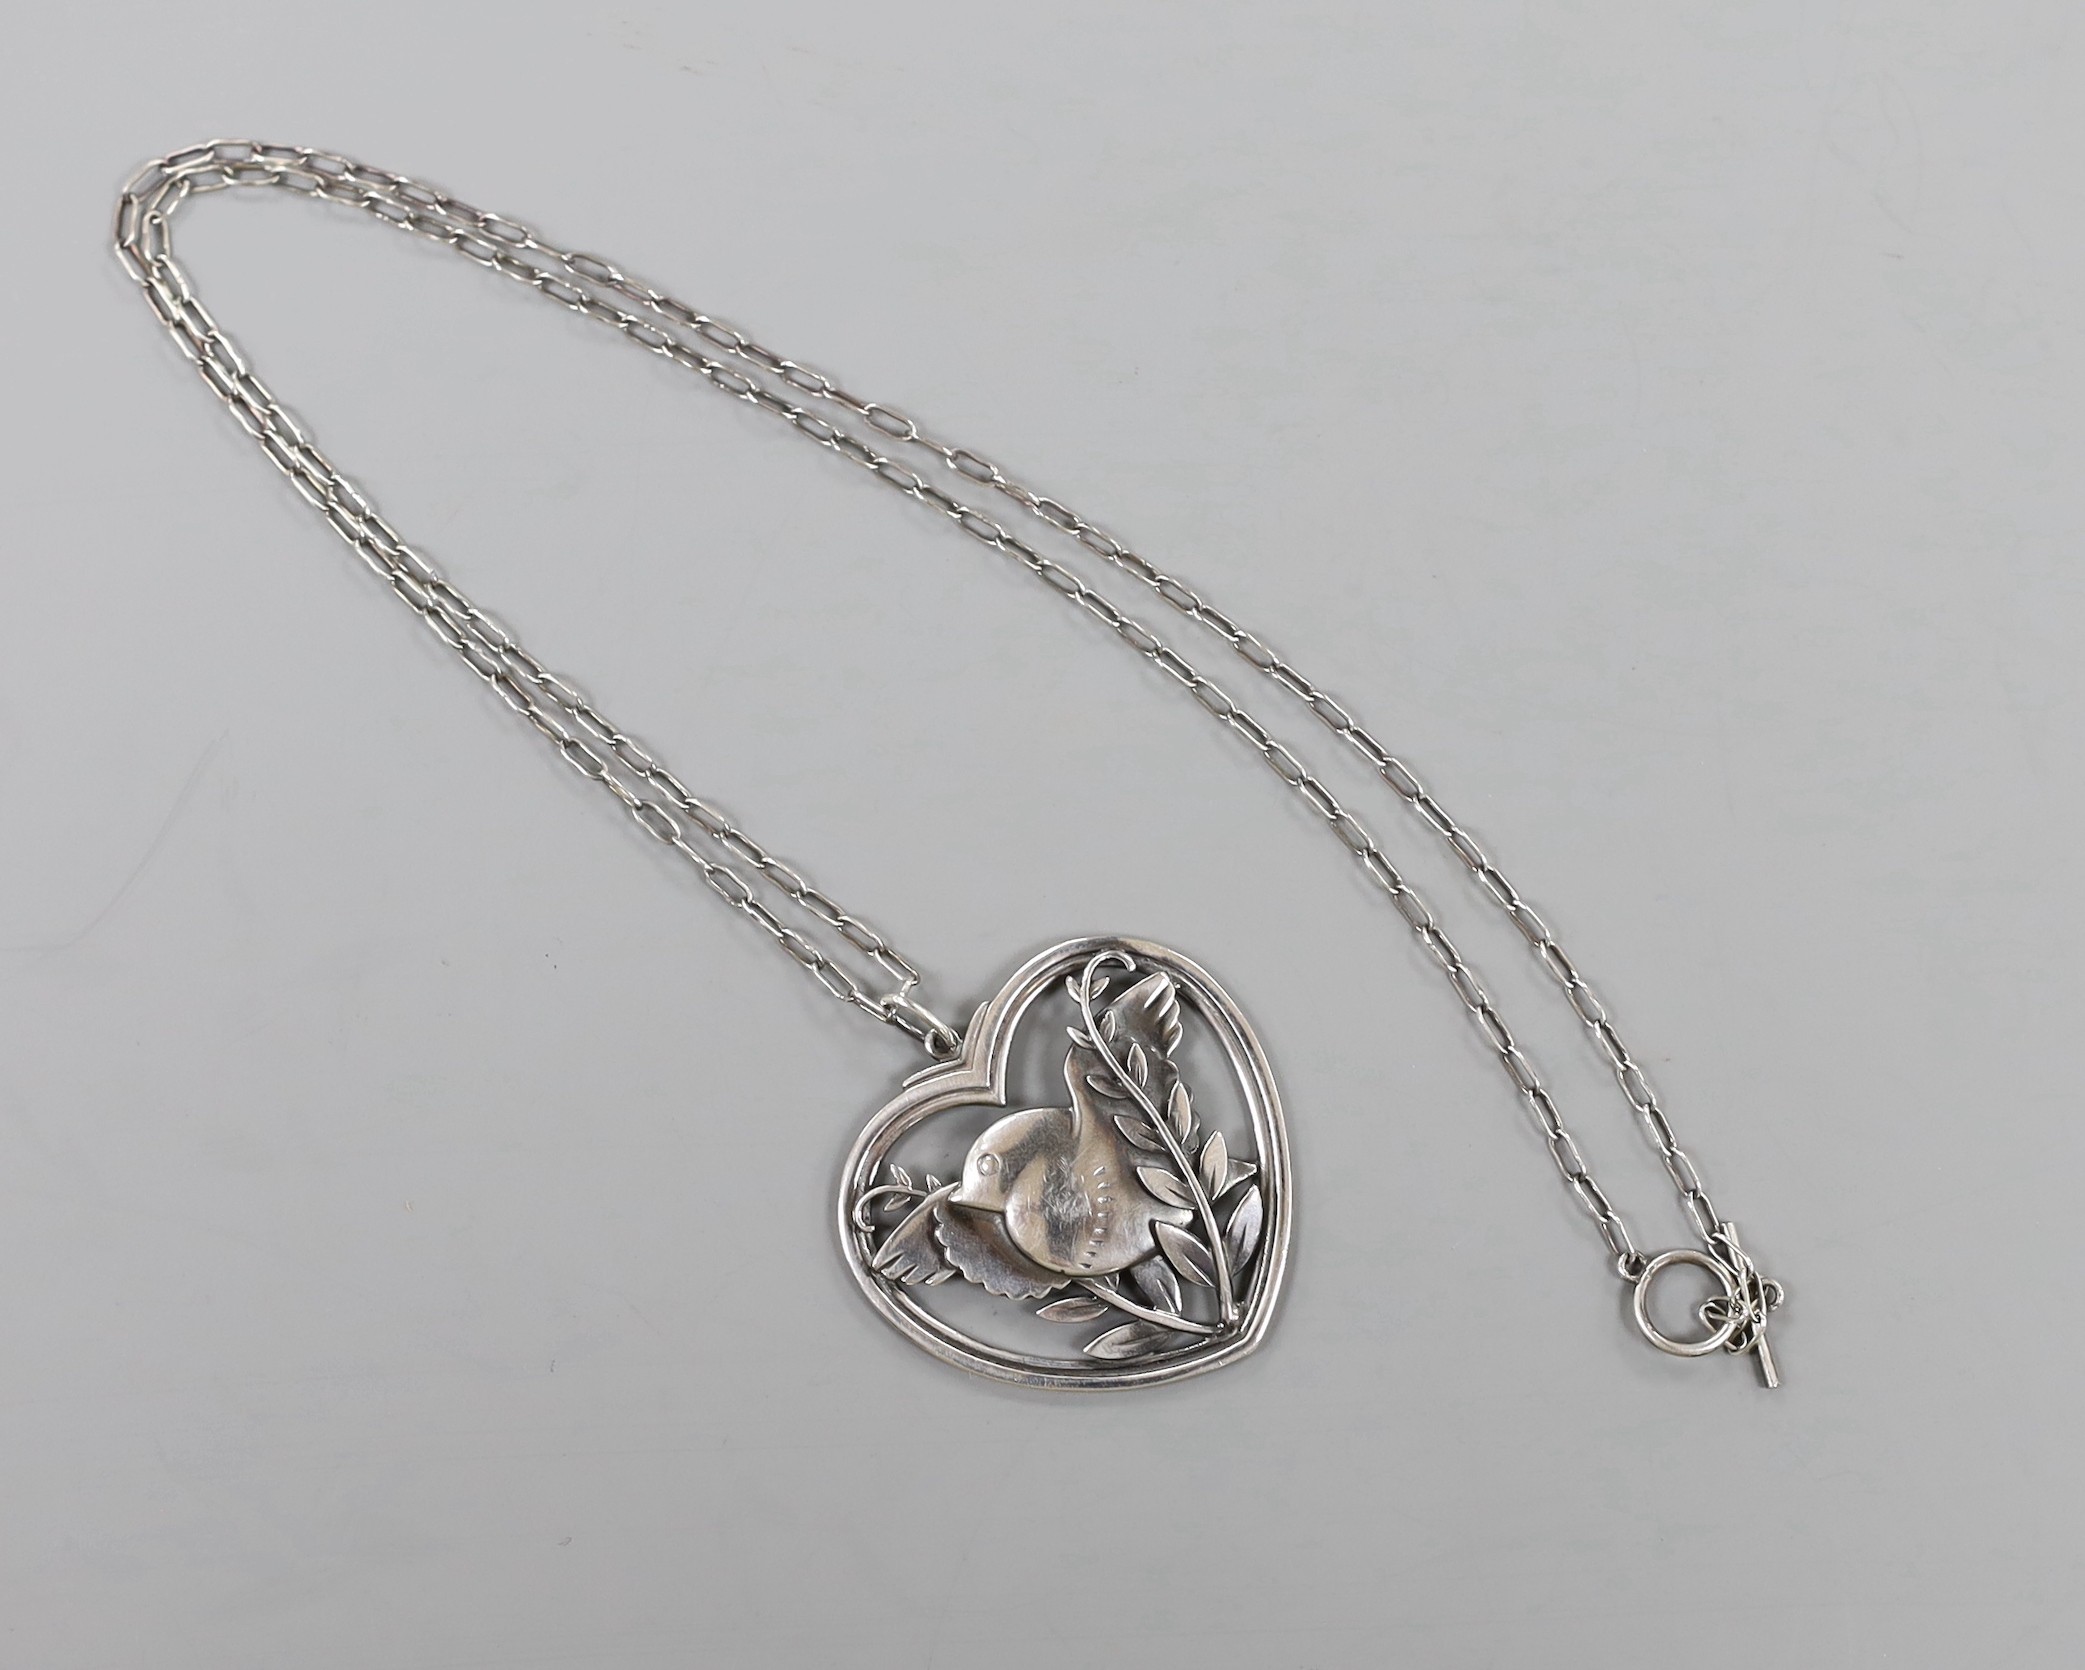 A Georg Jensen sterling 'Robin and frond' heart shaped pendant necklace, no. 97, 36mm.